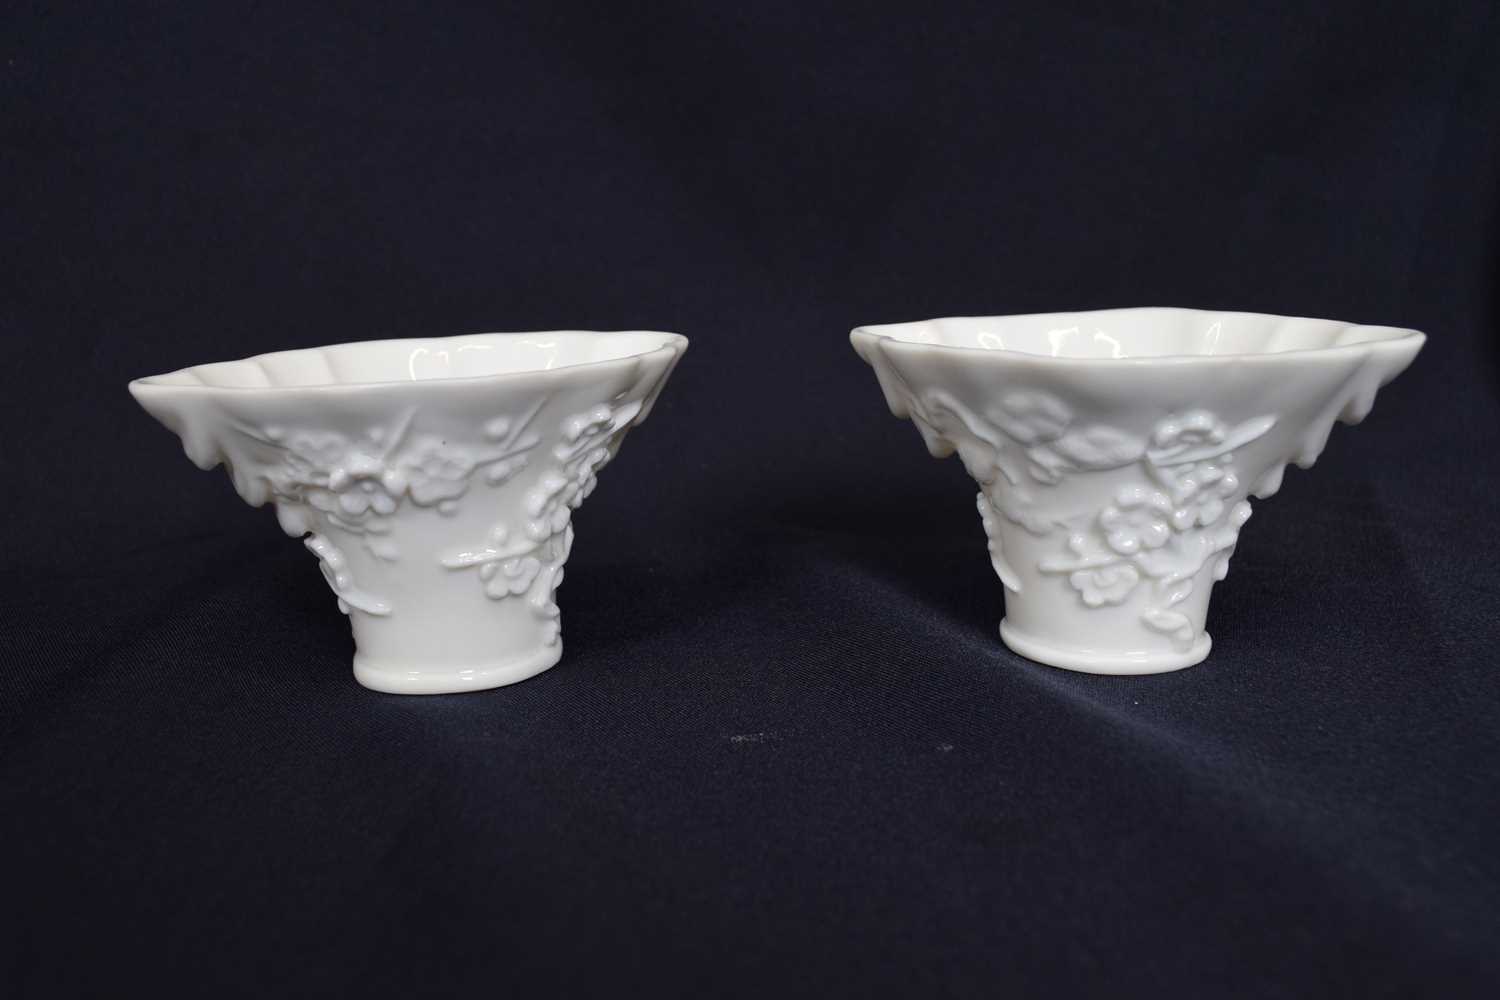 Pair of Chinese porcelain libation cups with moulded prunus design (2) - Image 2 of 3